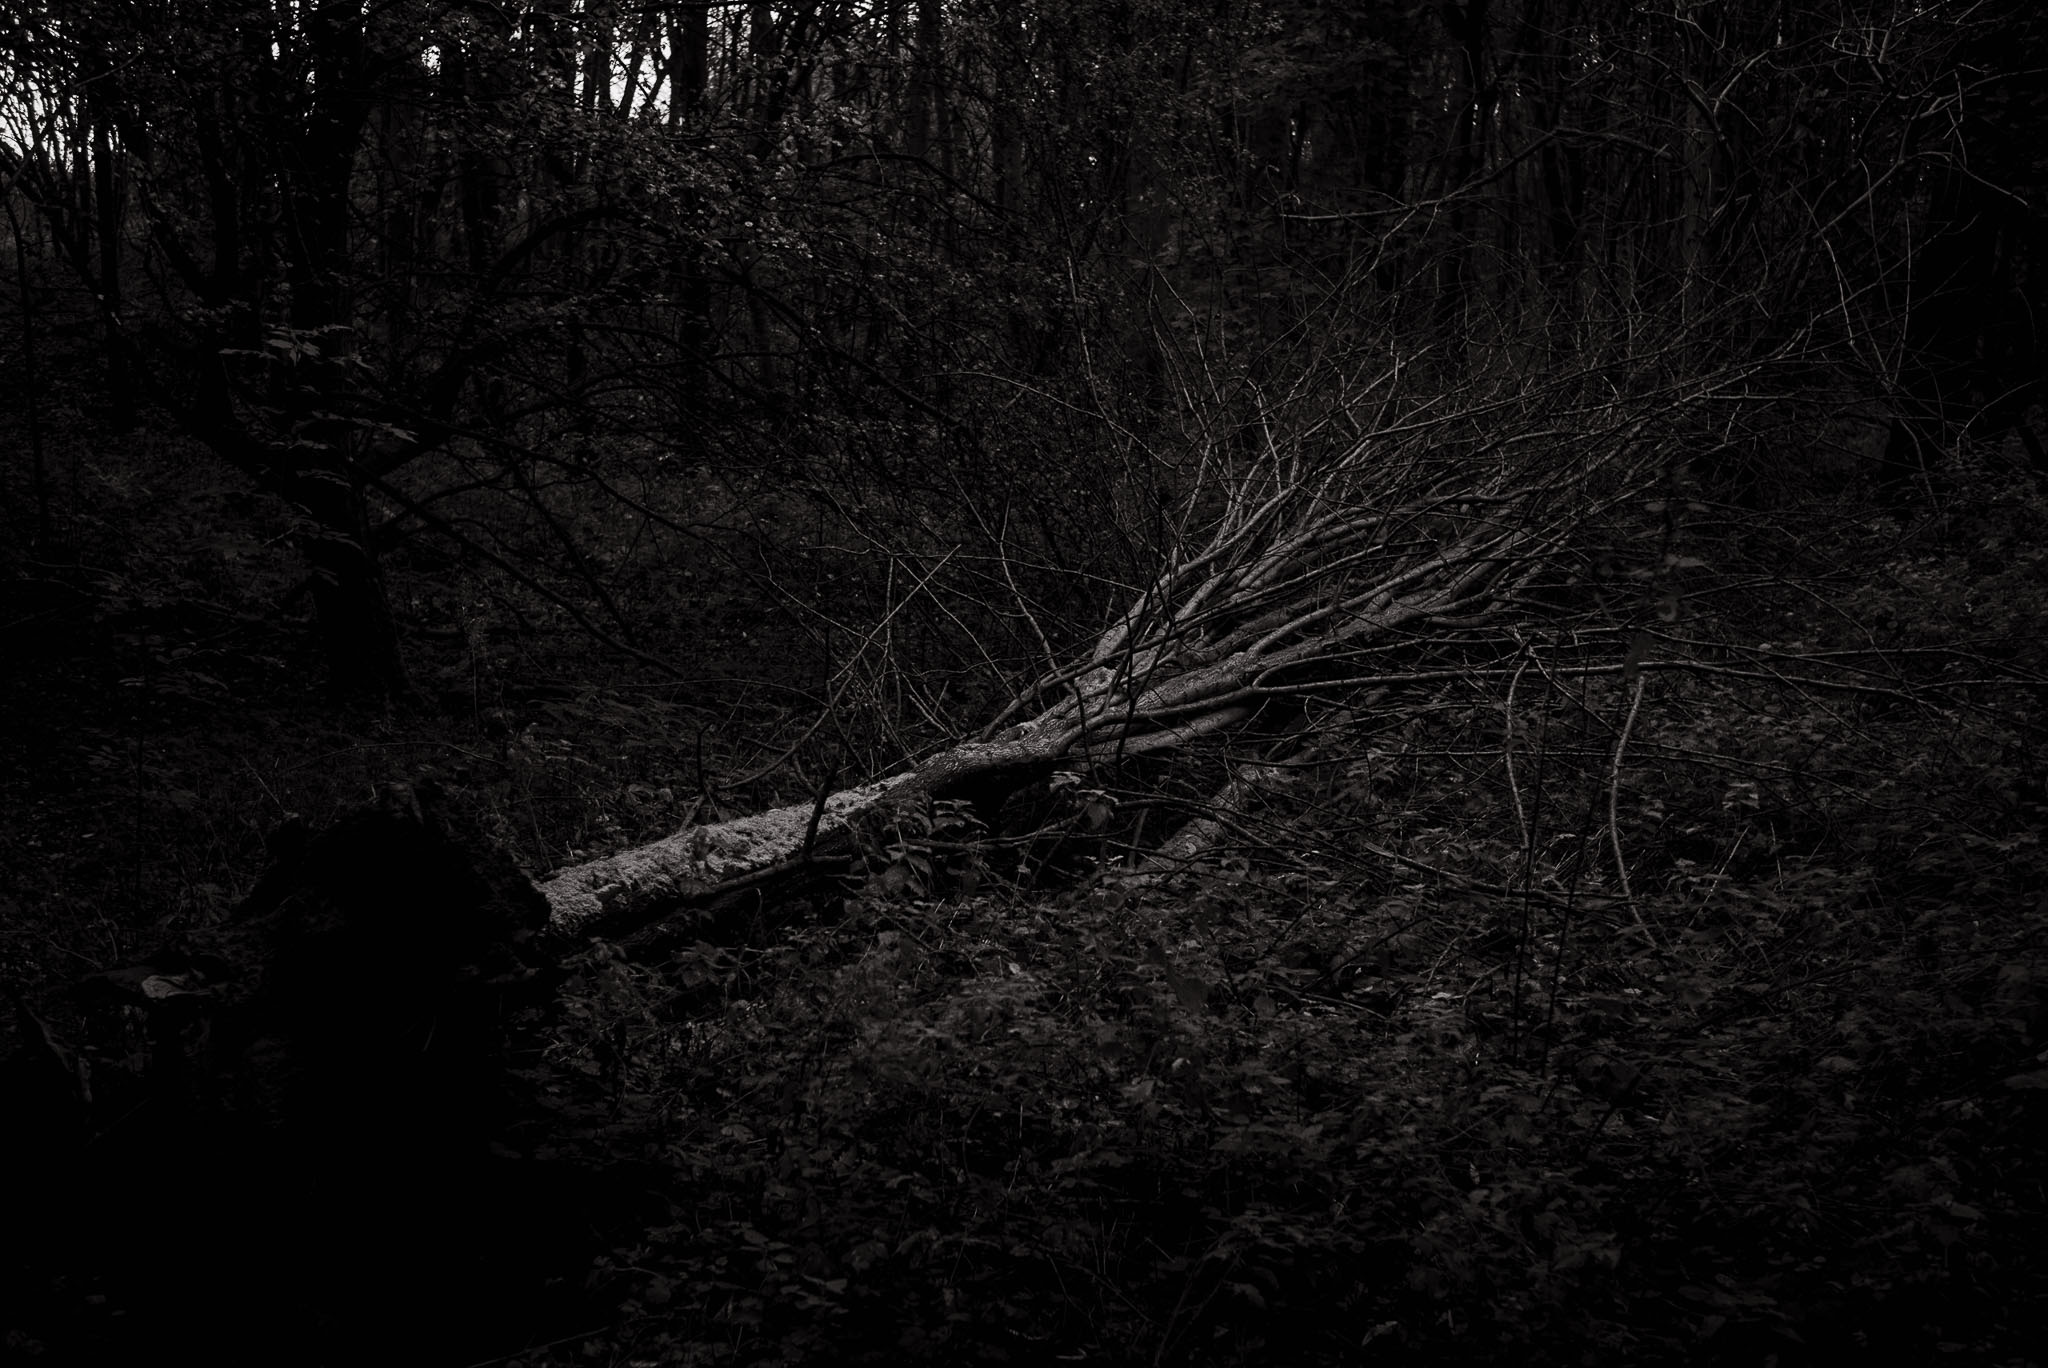 A large tree lies fallen on the ground in a dark woody space.